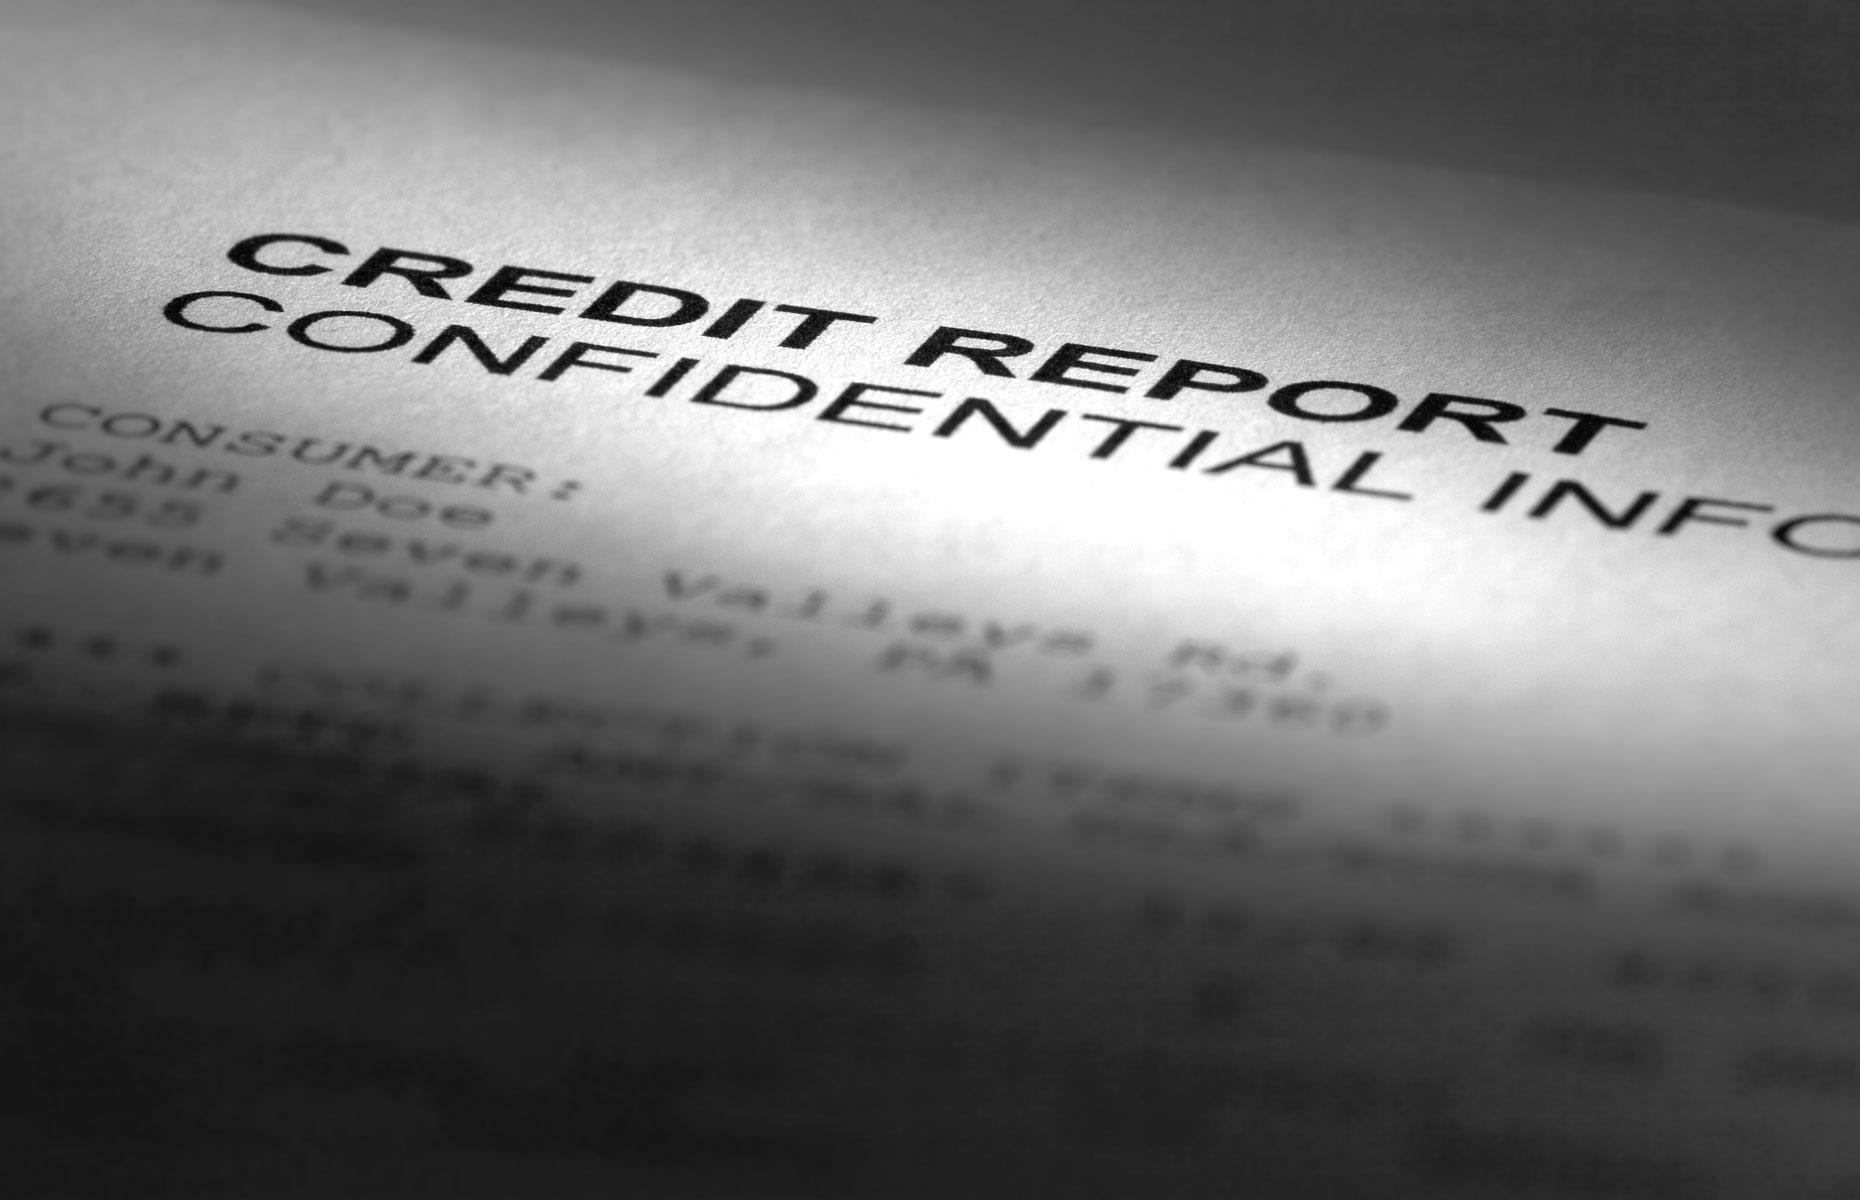 Your credit report